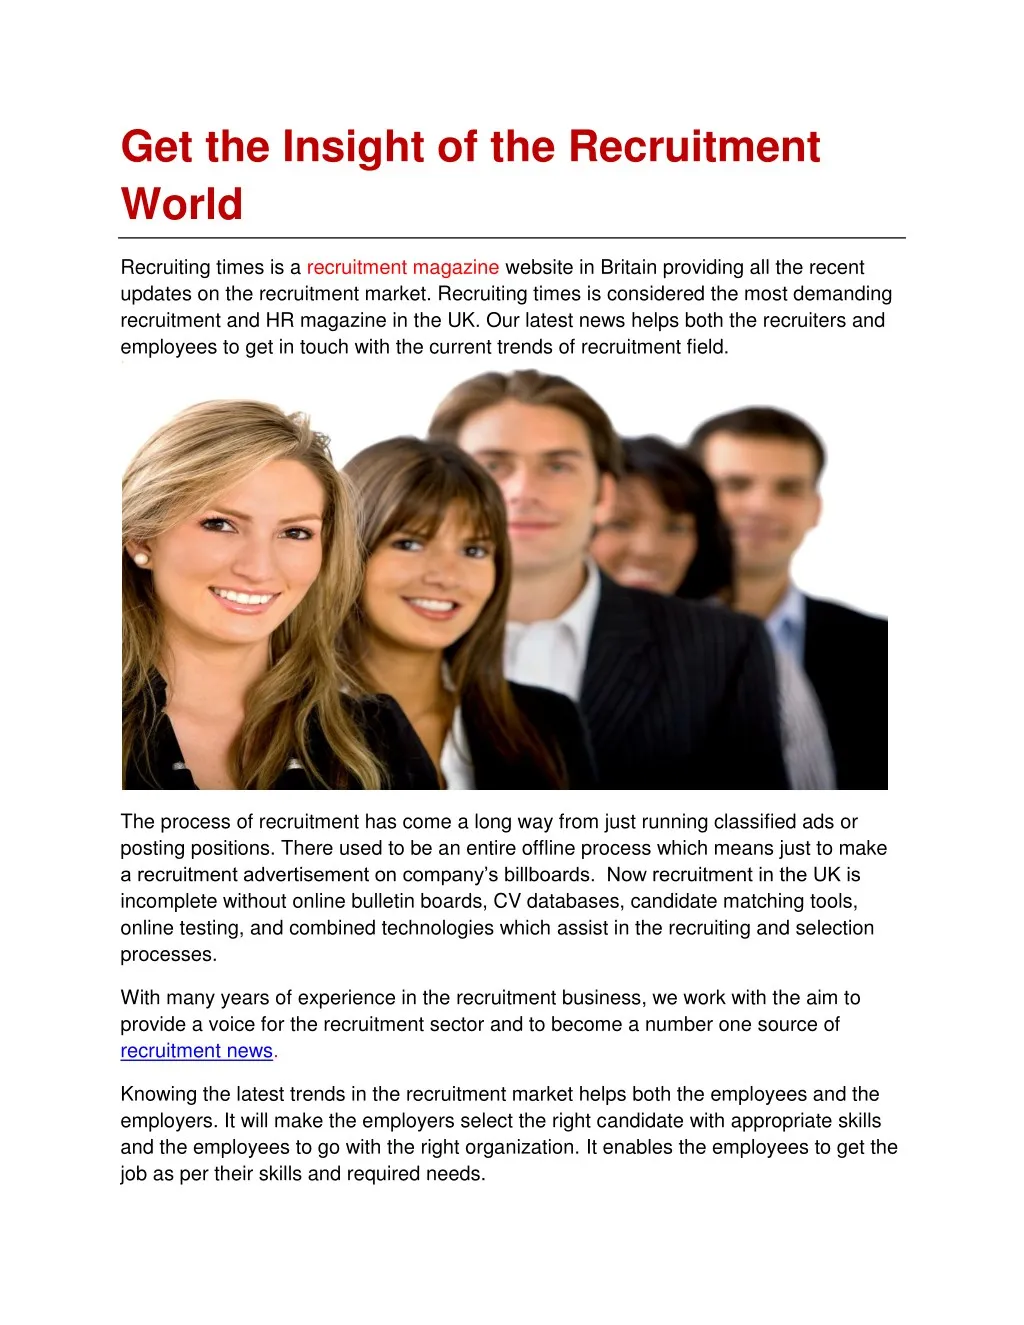 get the insight of the recruitment world